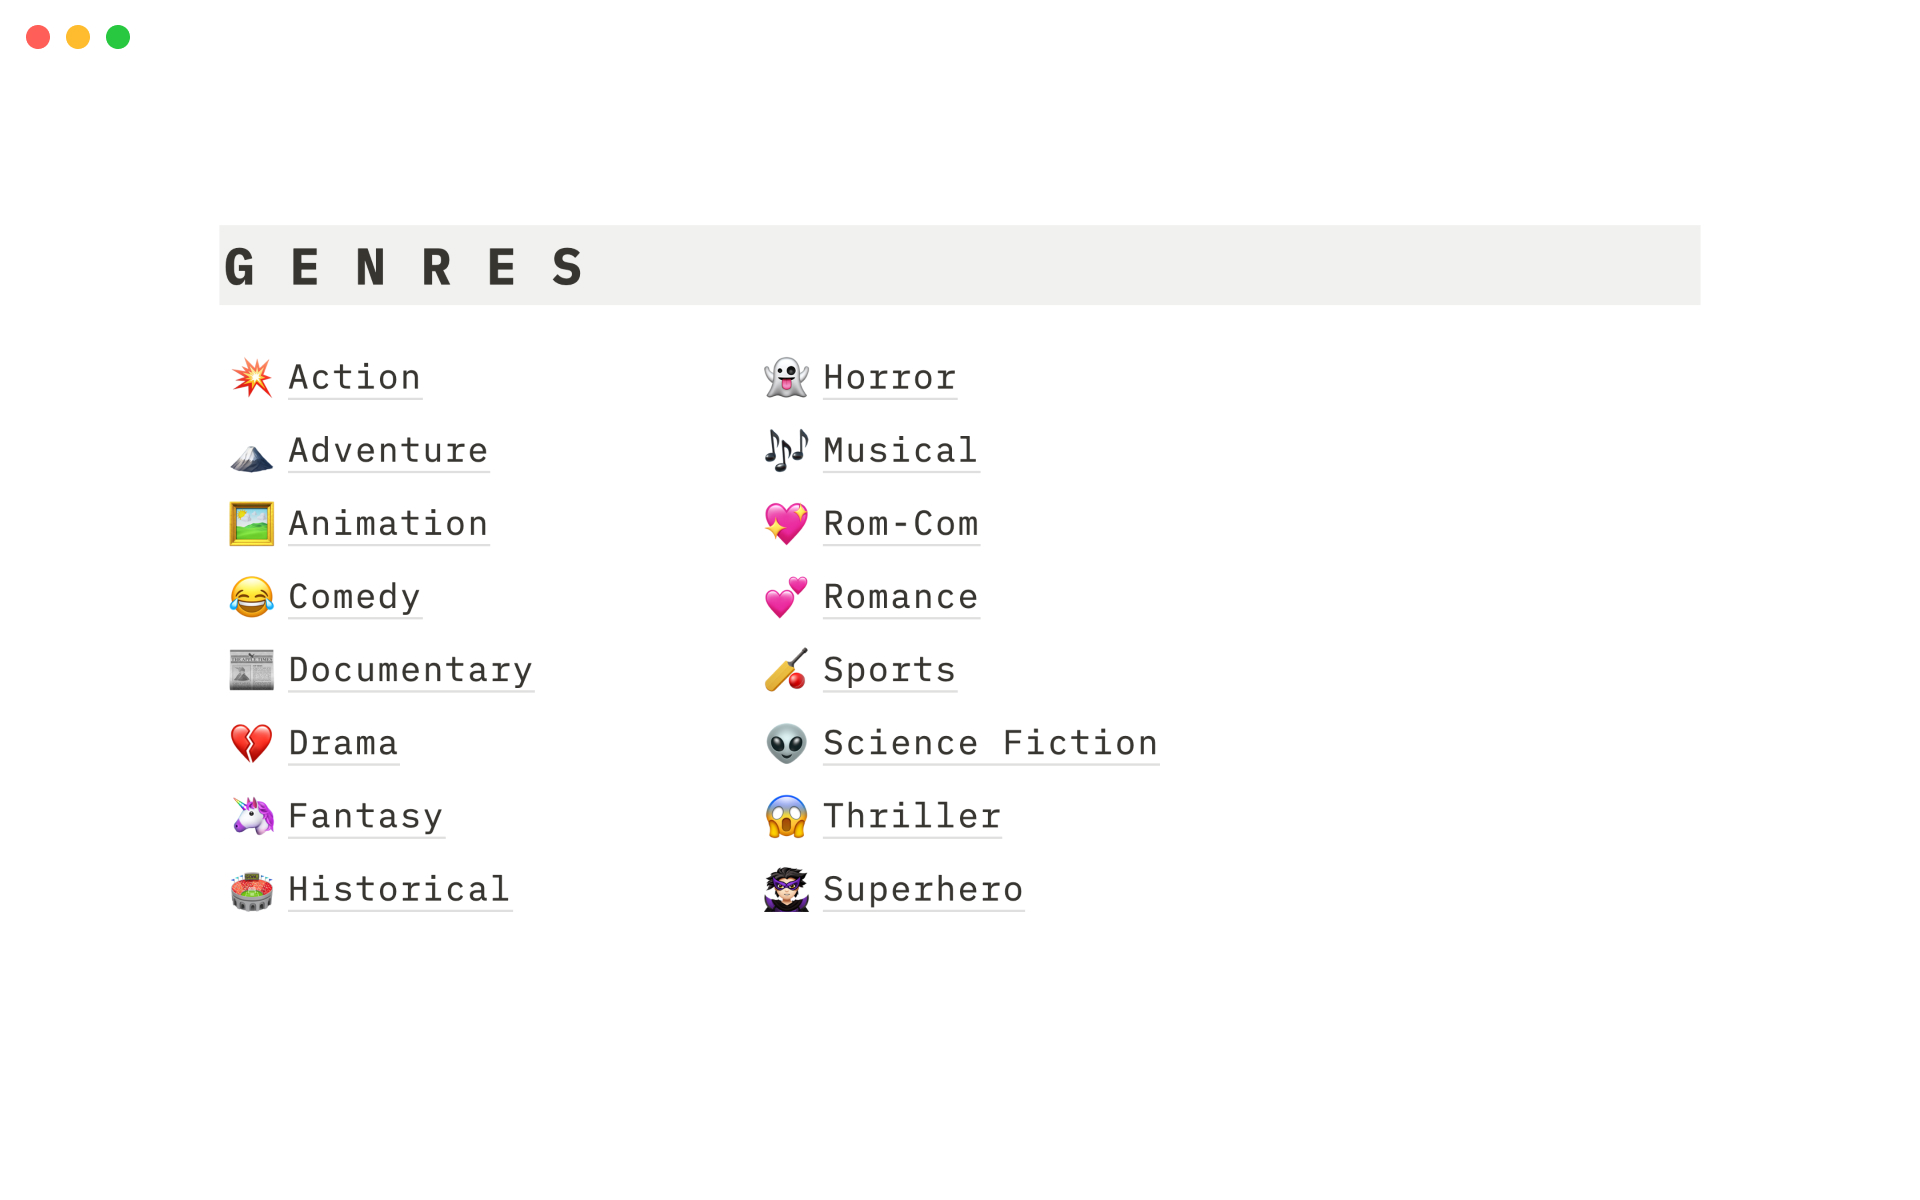 A screenshot of a movie tracker with a section for specific genres.